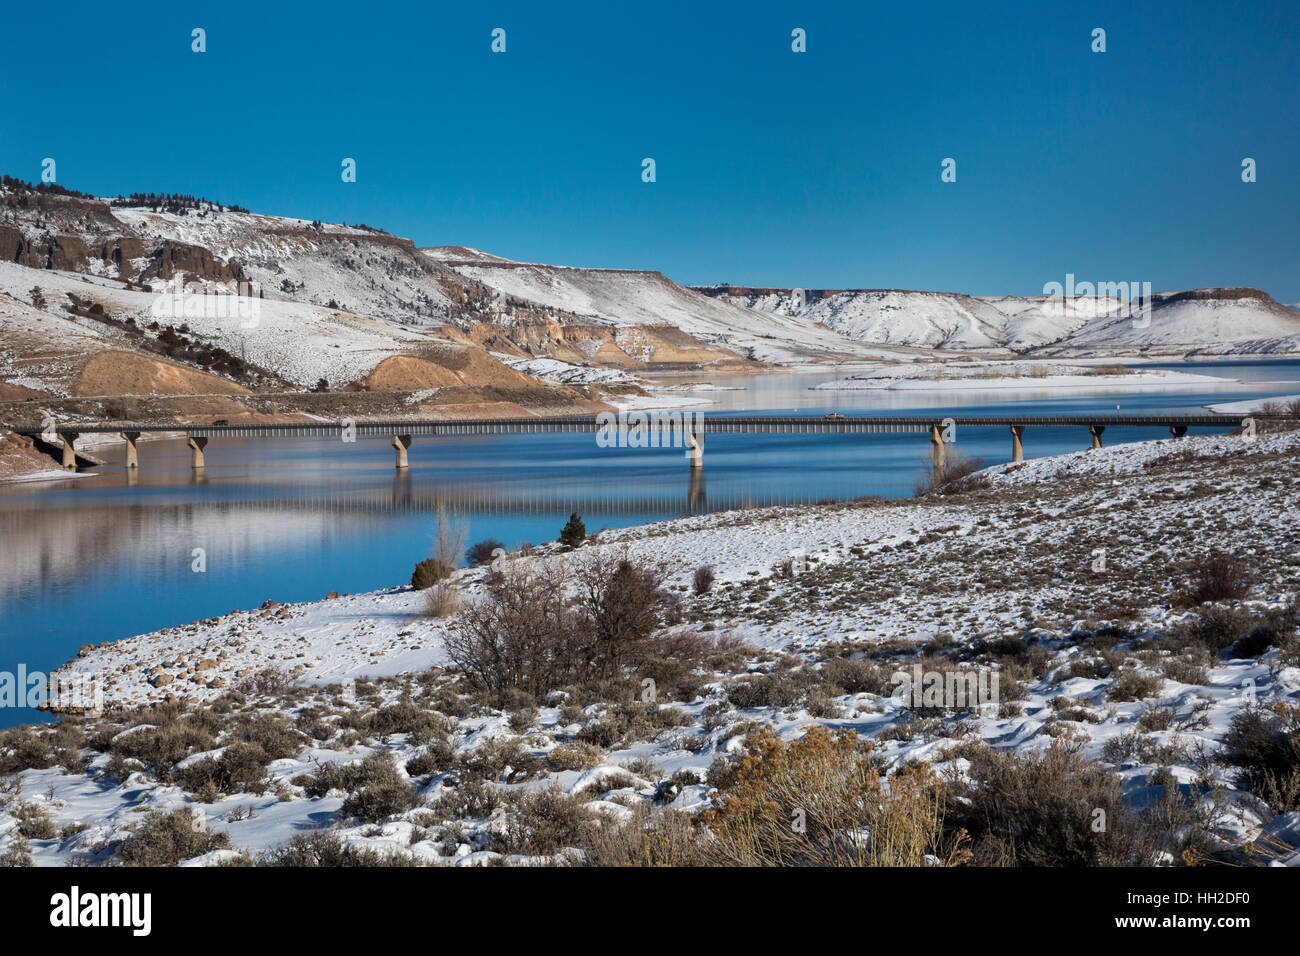 Sapinero, Colorado - The U.S. Highway 50 bridge over Blue Mesa Reservoir in Curecanti National Recreation Area. The reservoir was created by damming t Stock Photo